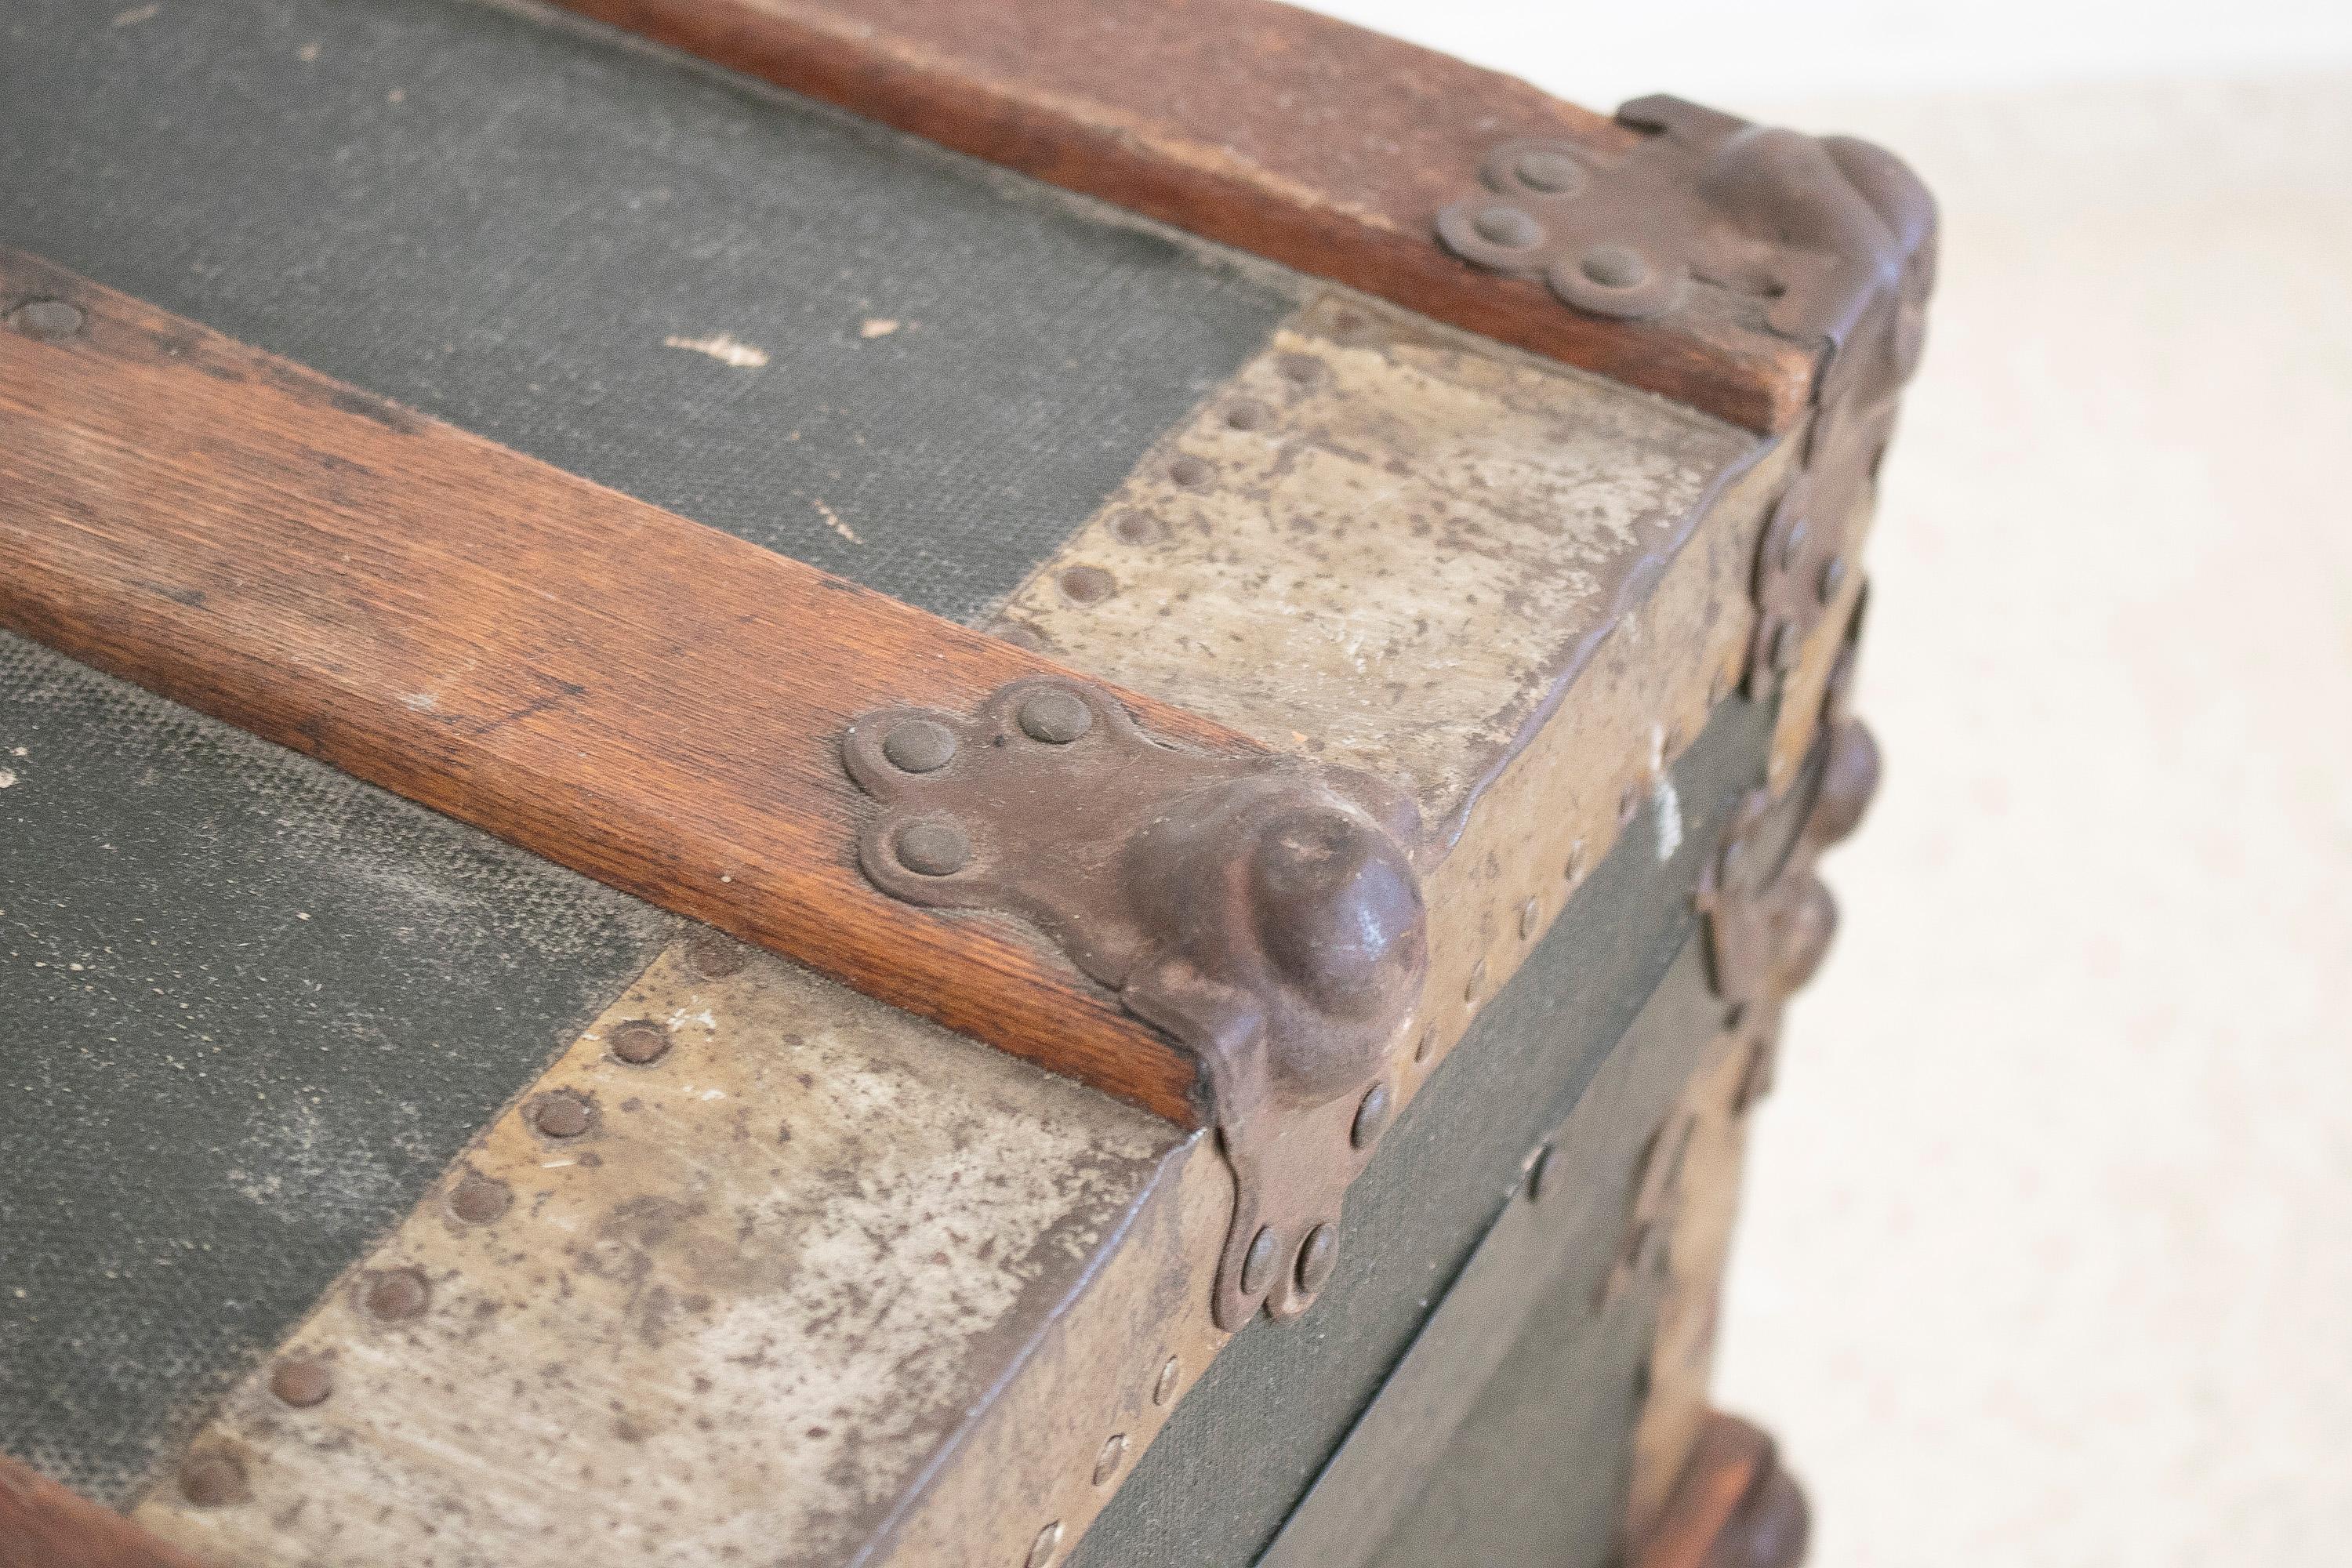 1940s Spanish Leather & Wood Travel Trunk w/ Initials 9